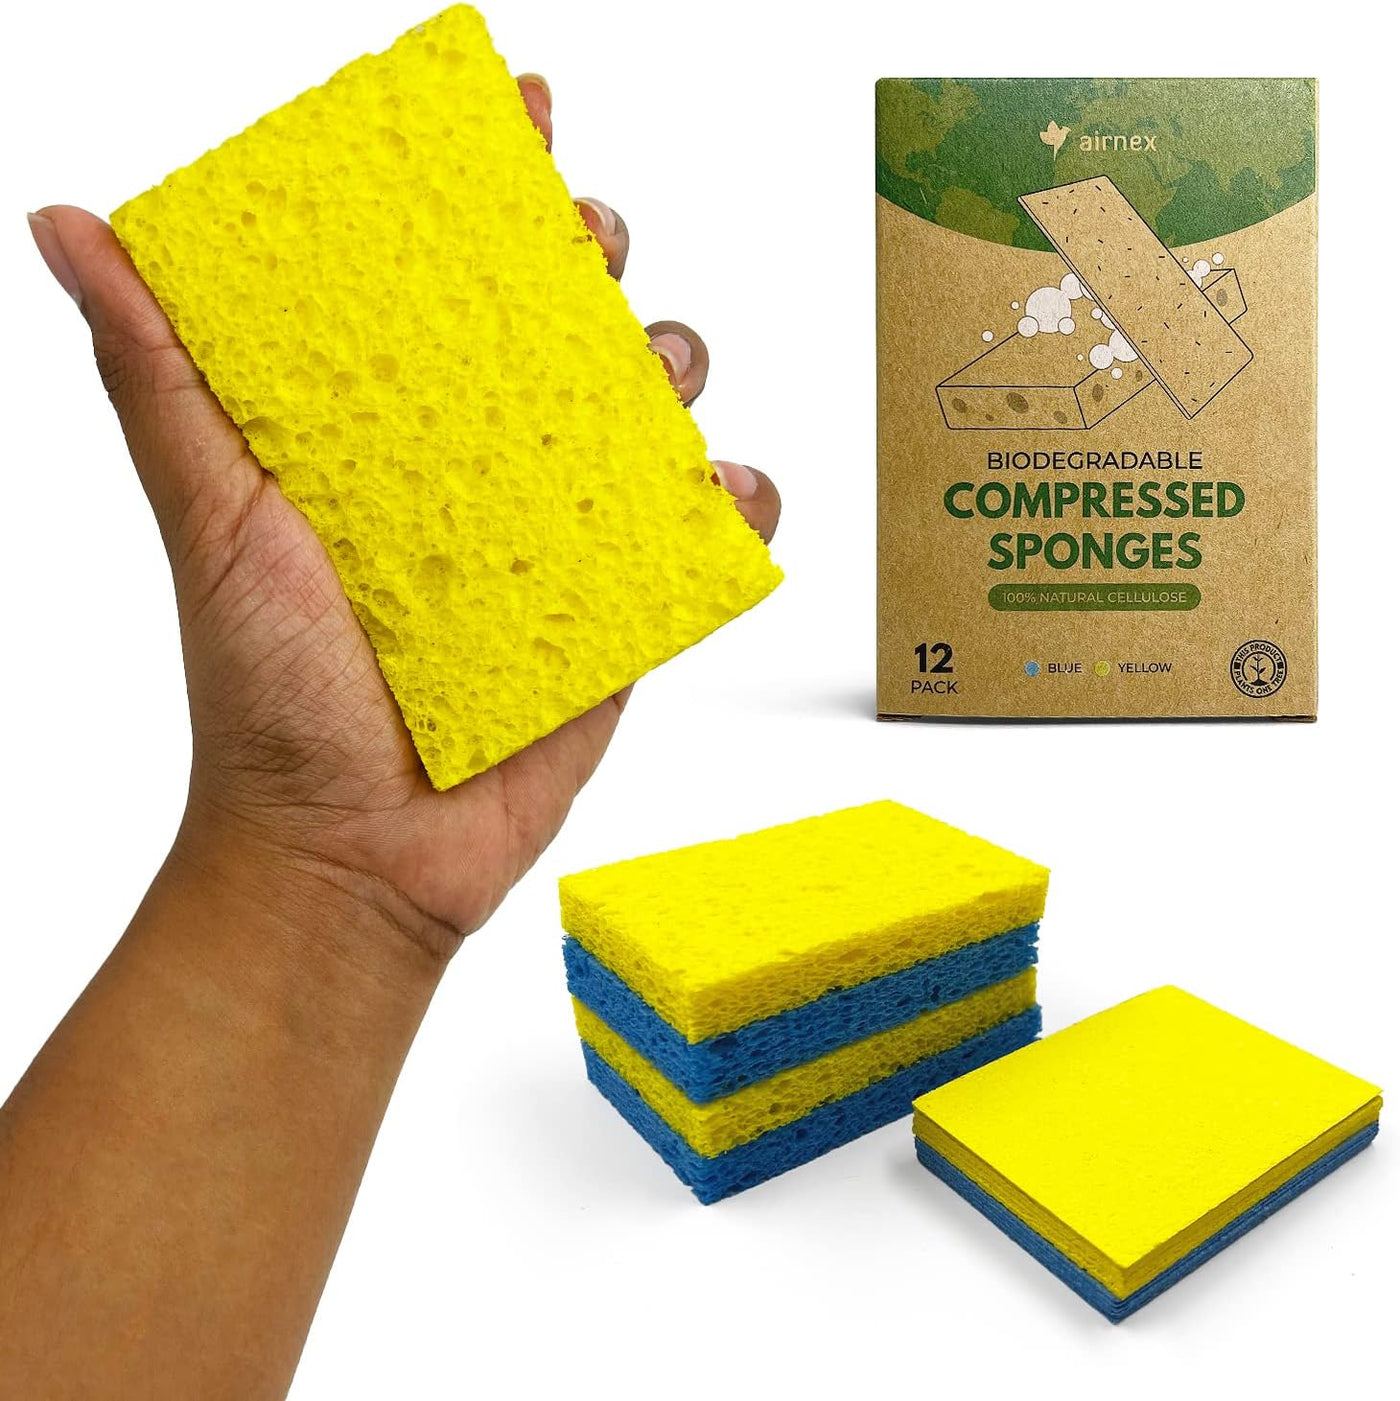 AIRNEX Biodegradable Cellulose Compressed Sponges - Kitchen Sponges for  Cleaning - Heavy Duty and Natural Multipurpose Household Cleaning Sponges  Good